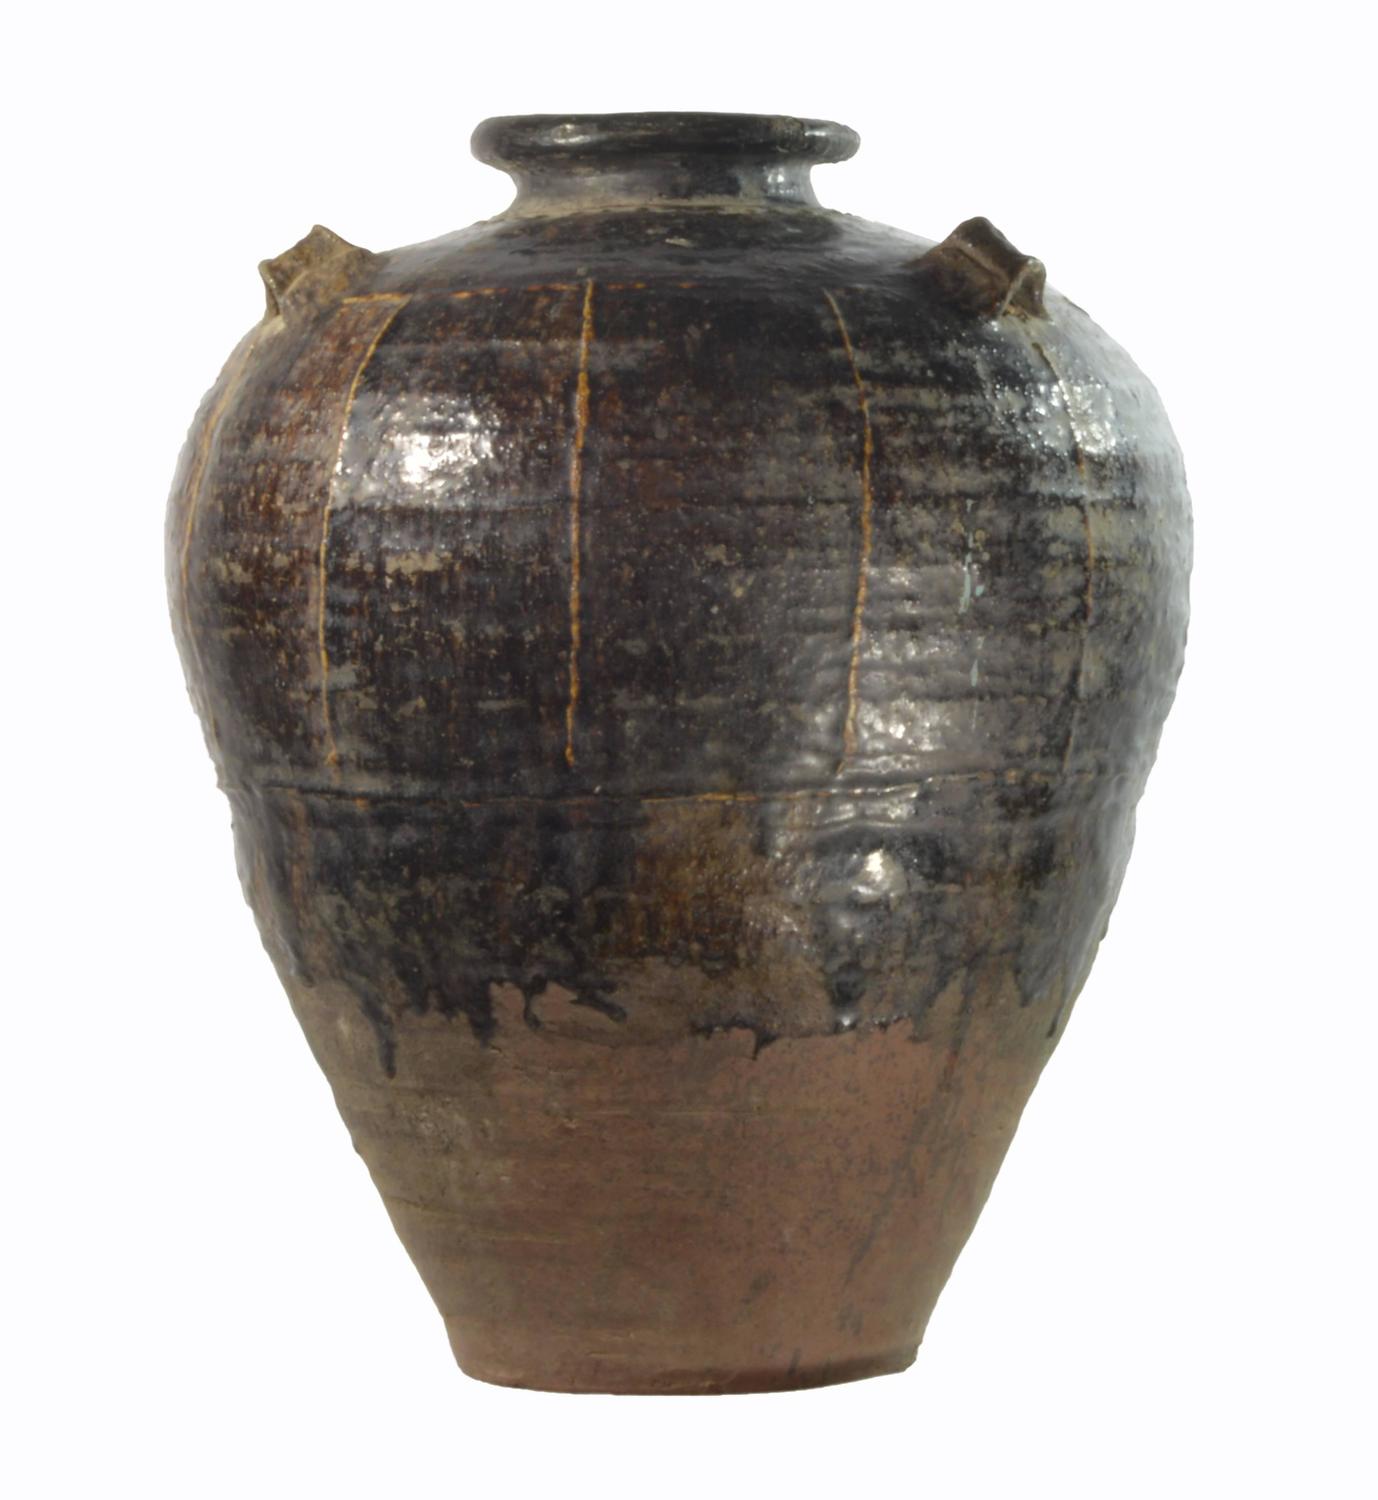 Large 18th Century Ceramic Vessel For Sale at 1stdibs